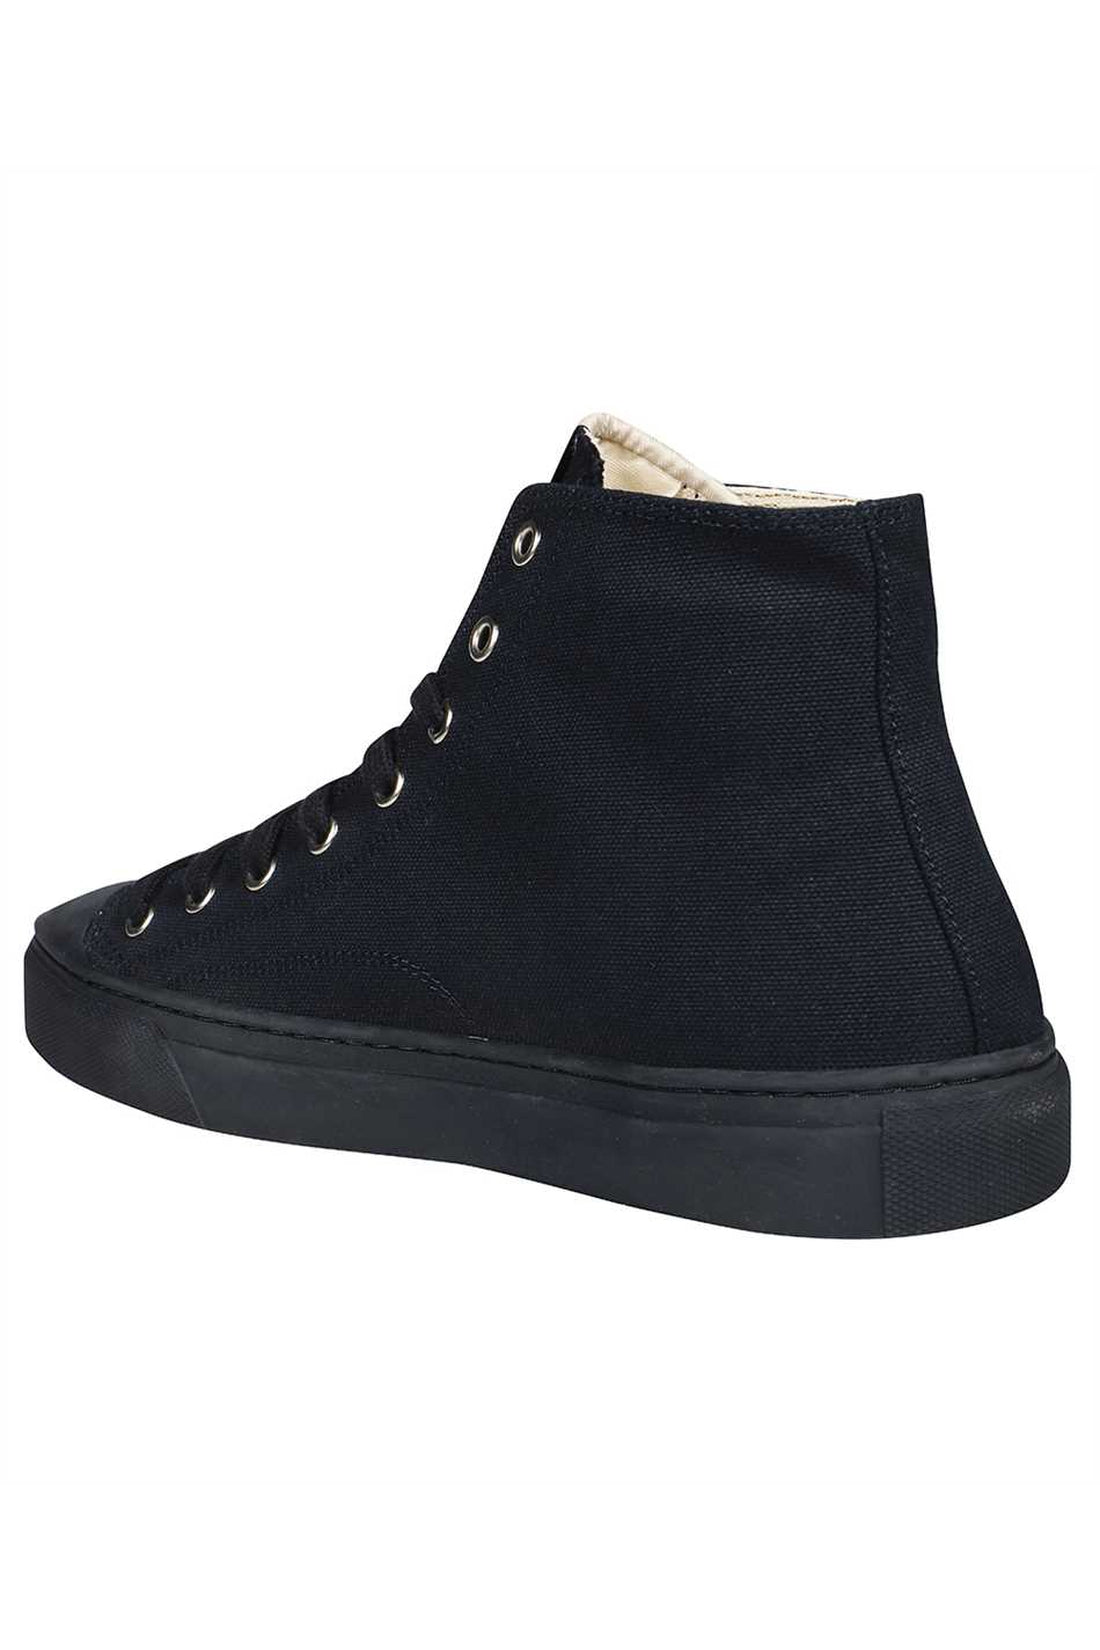 Vivienne Westwood-OUTLET-SALE-The Plimsoll high-top sneakers-ARCHIVIST